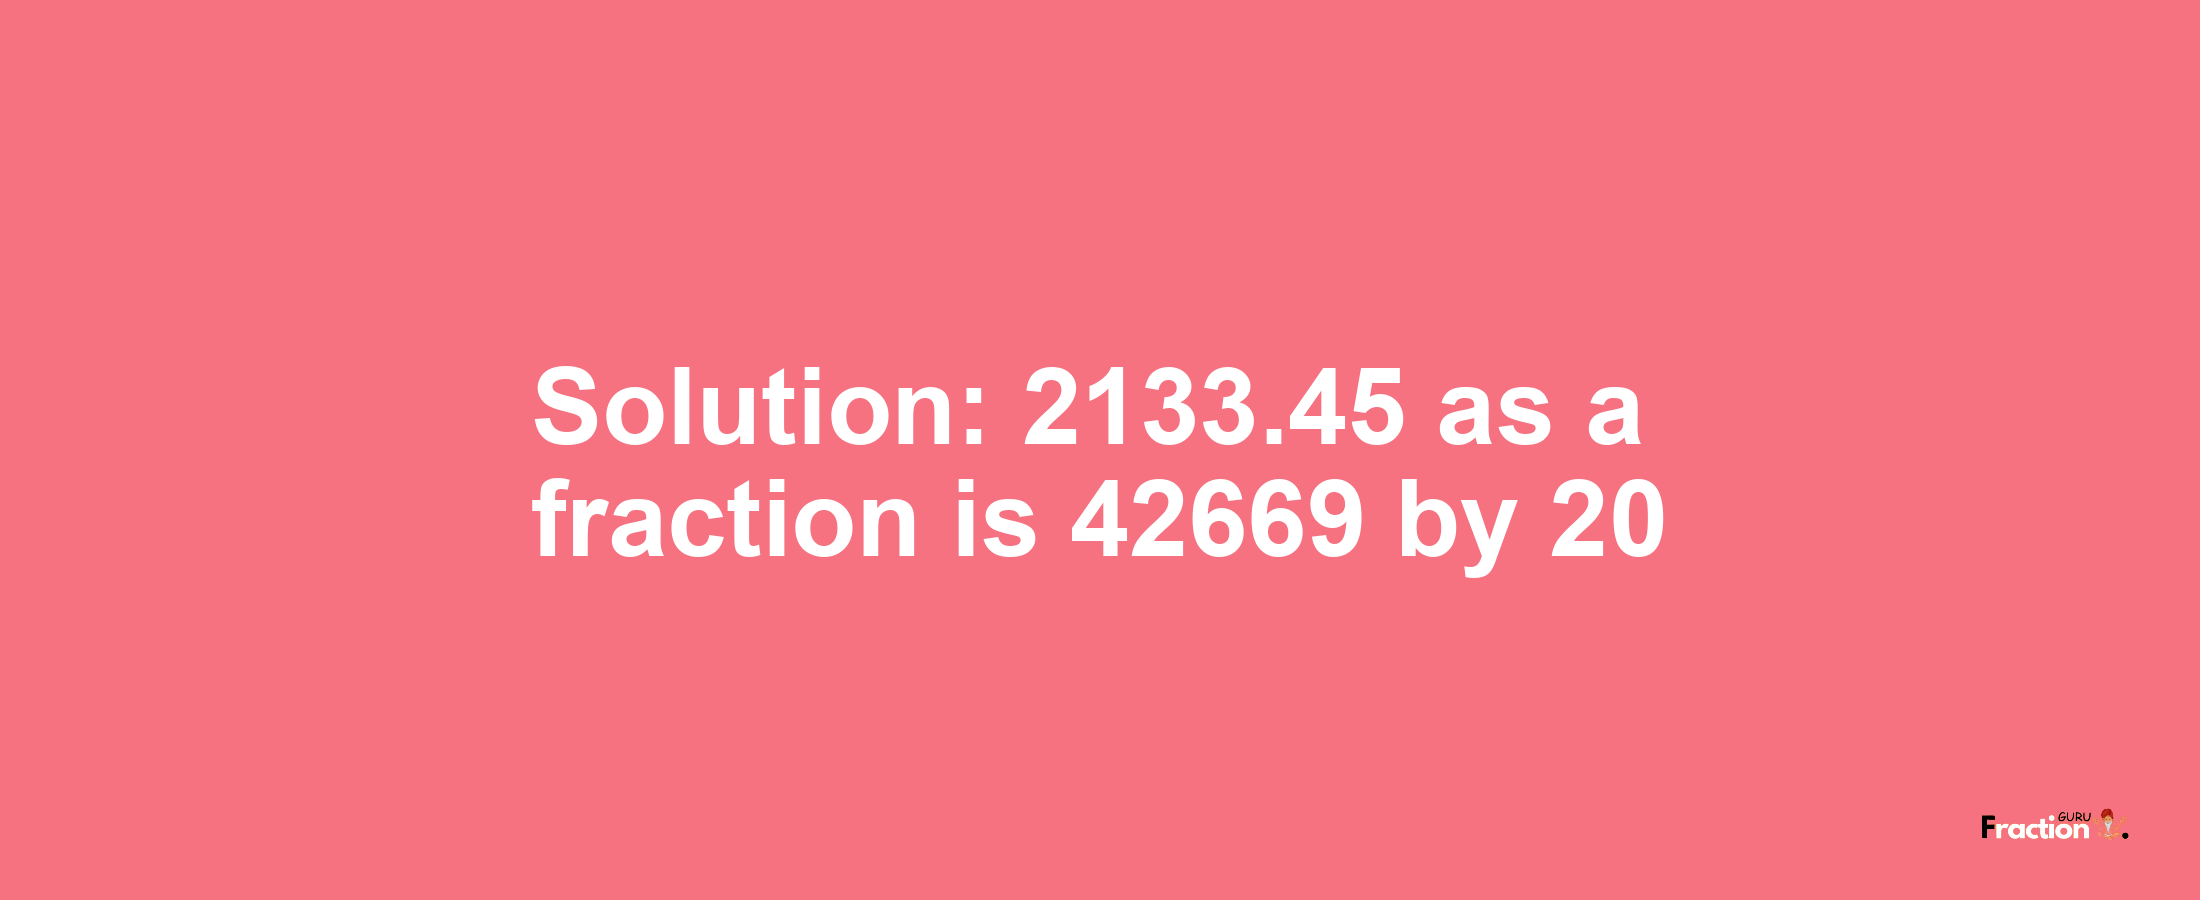 Solution:2133.45 as a fraction is 42669/20